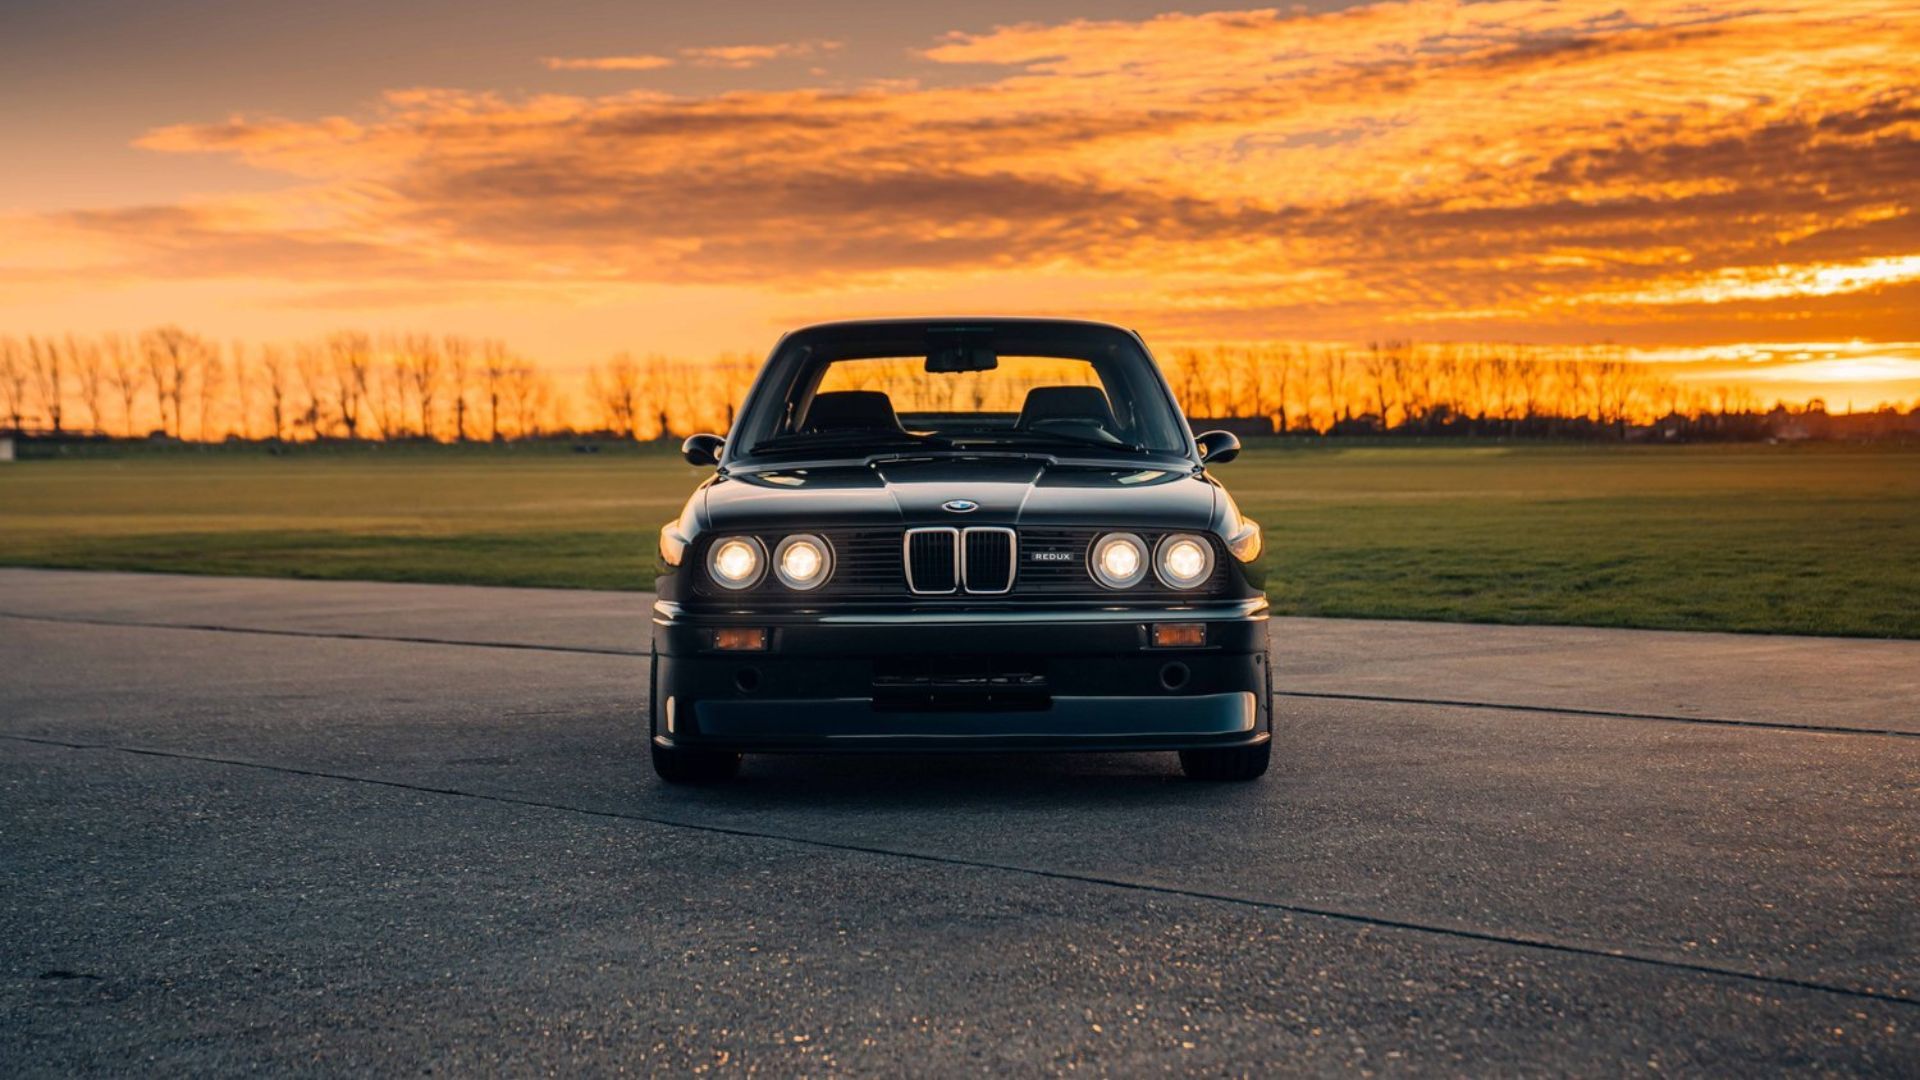 The BMW E30 M3 Restomod: A Fusion Of Timeless Design With Impressive Power